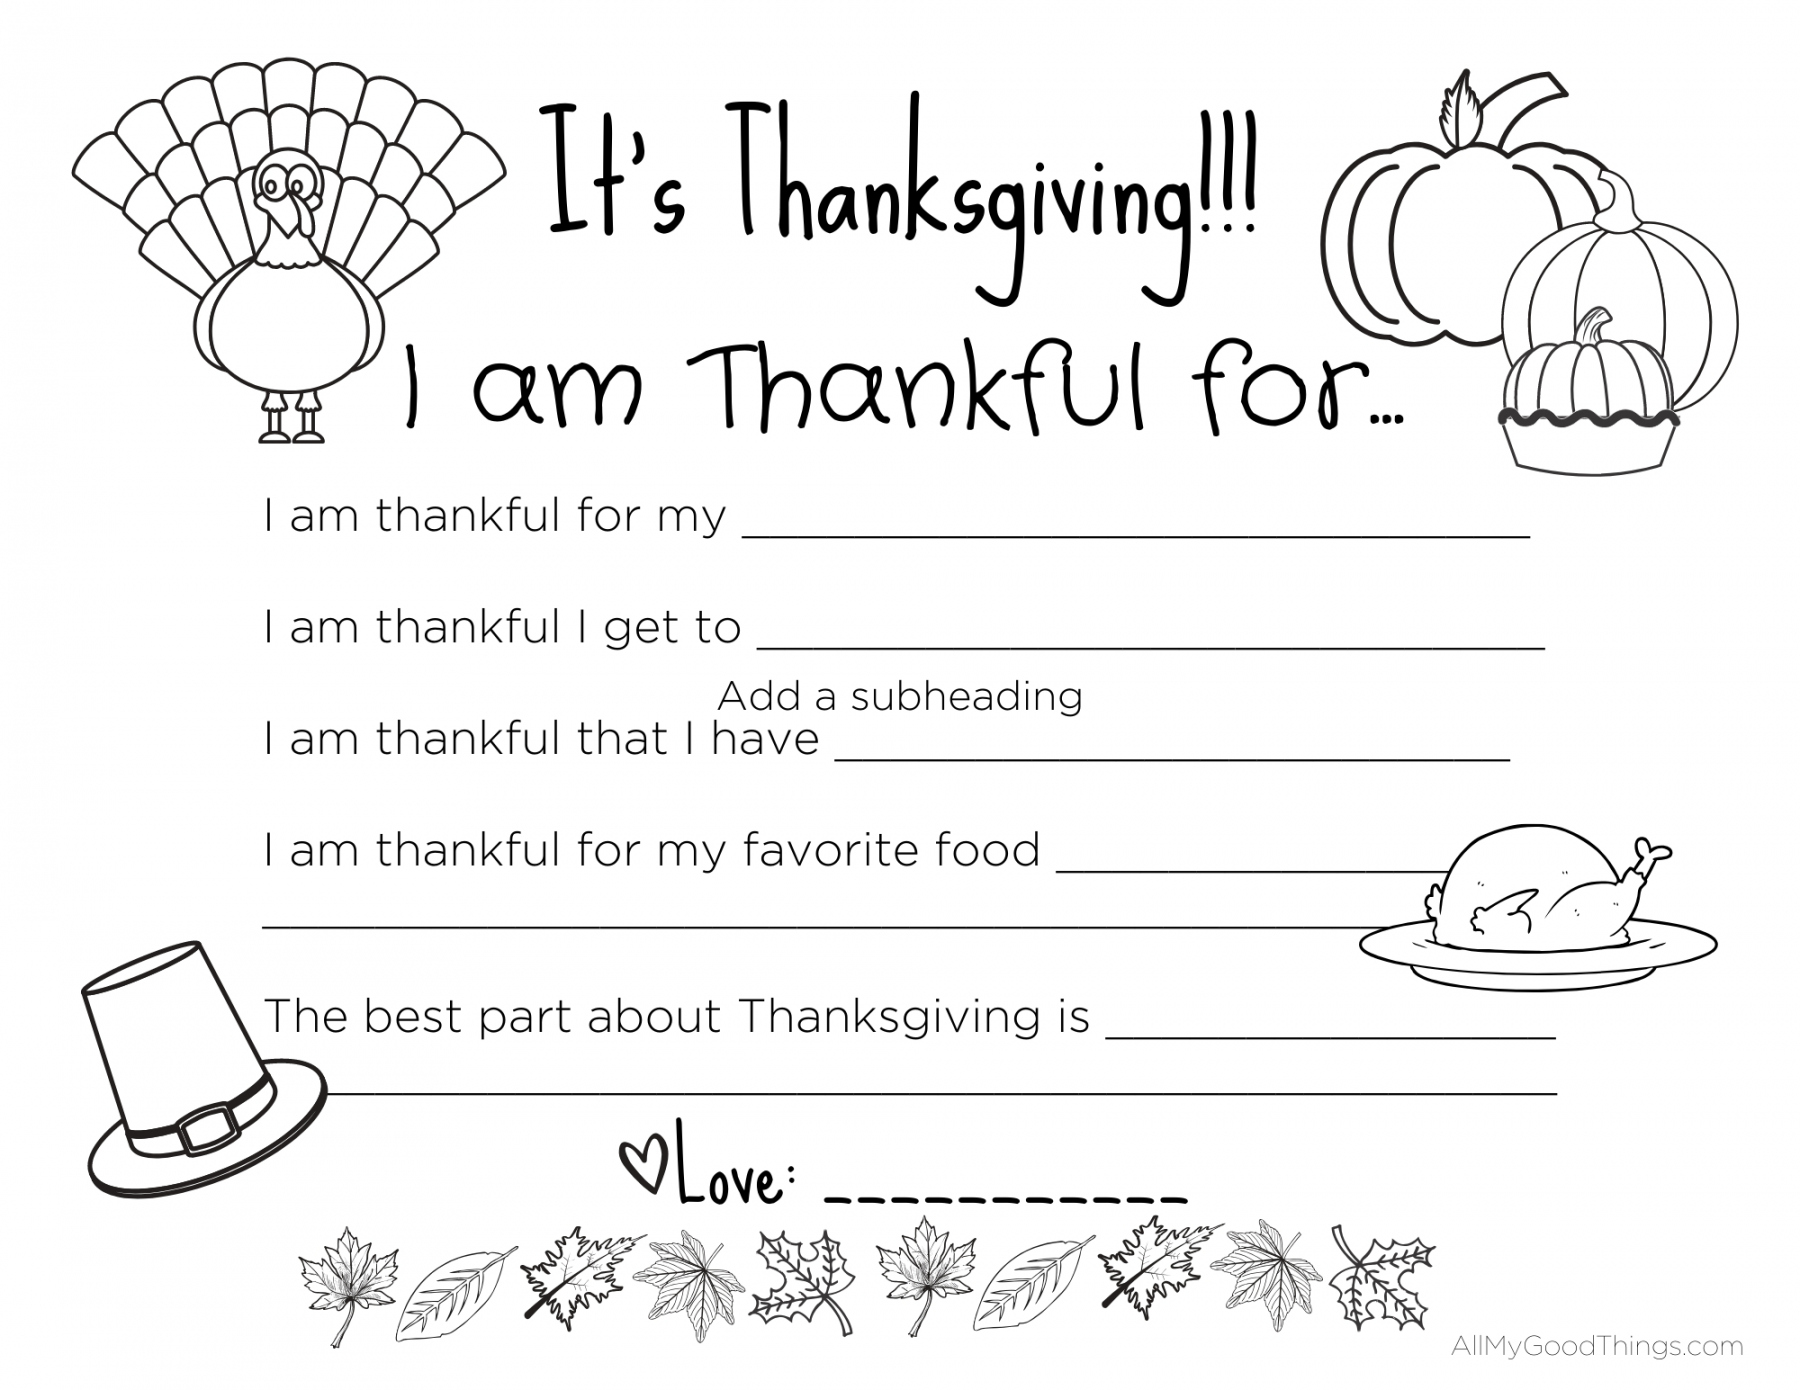 I Am Thankful For Free Printable - Printable - FREE Printable Thanksgiving Placemats for the Kids - All My Good